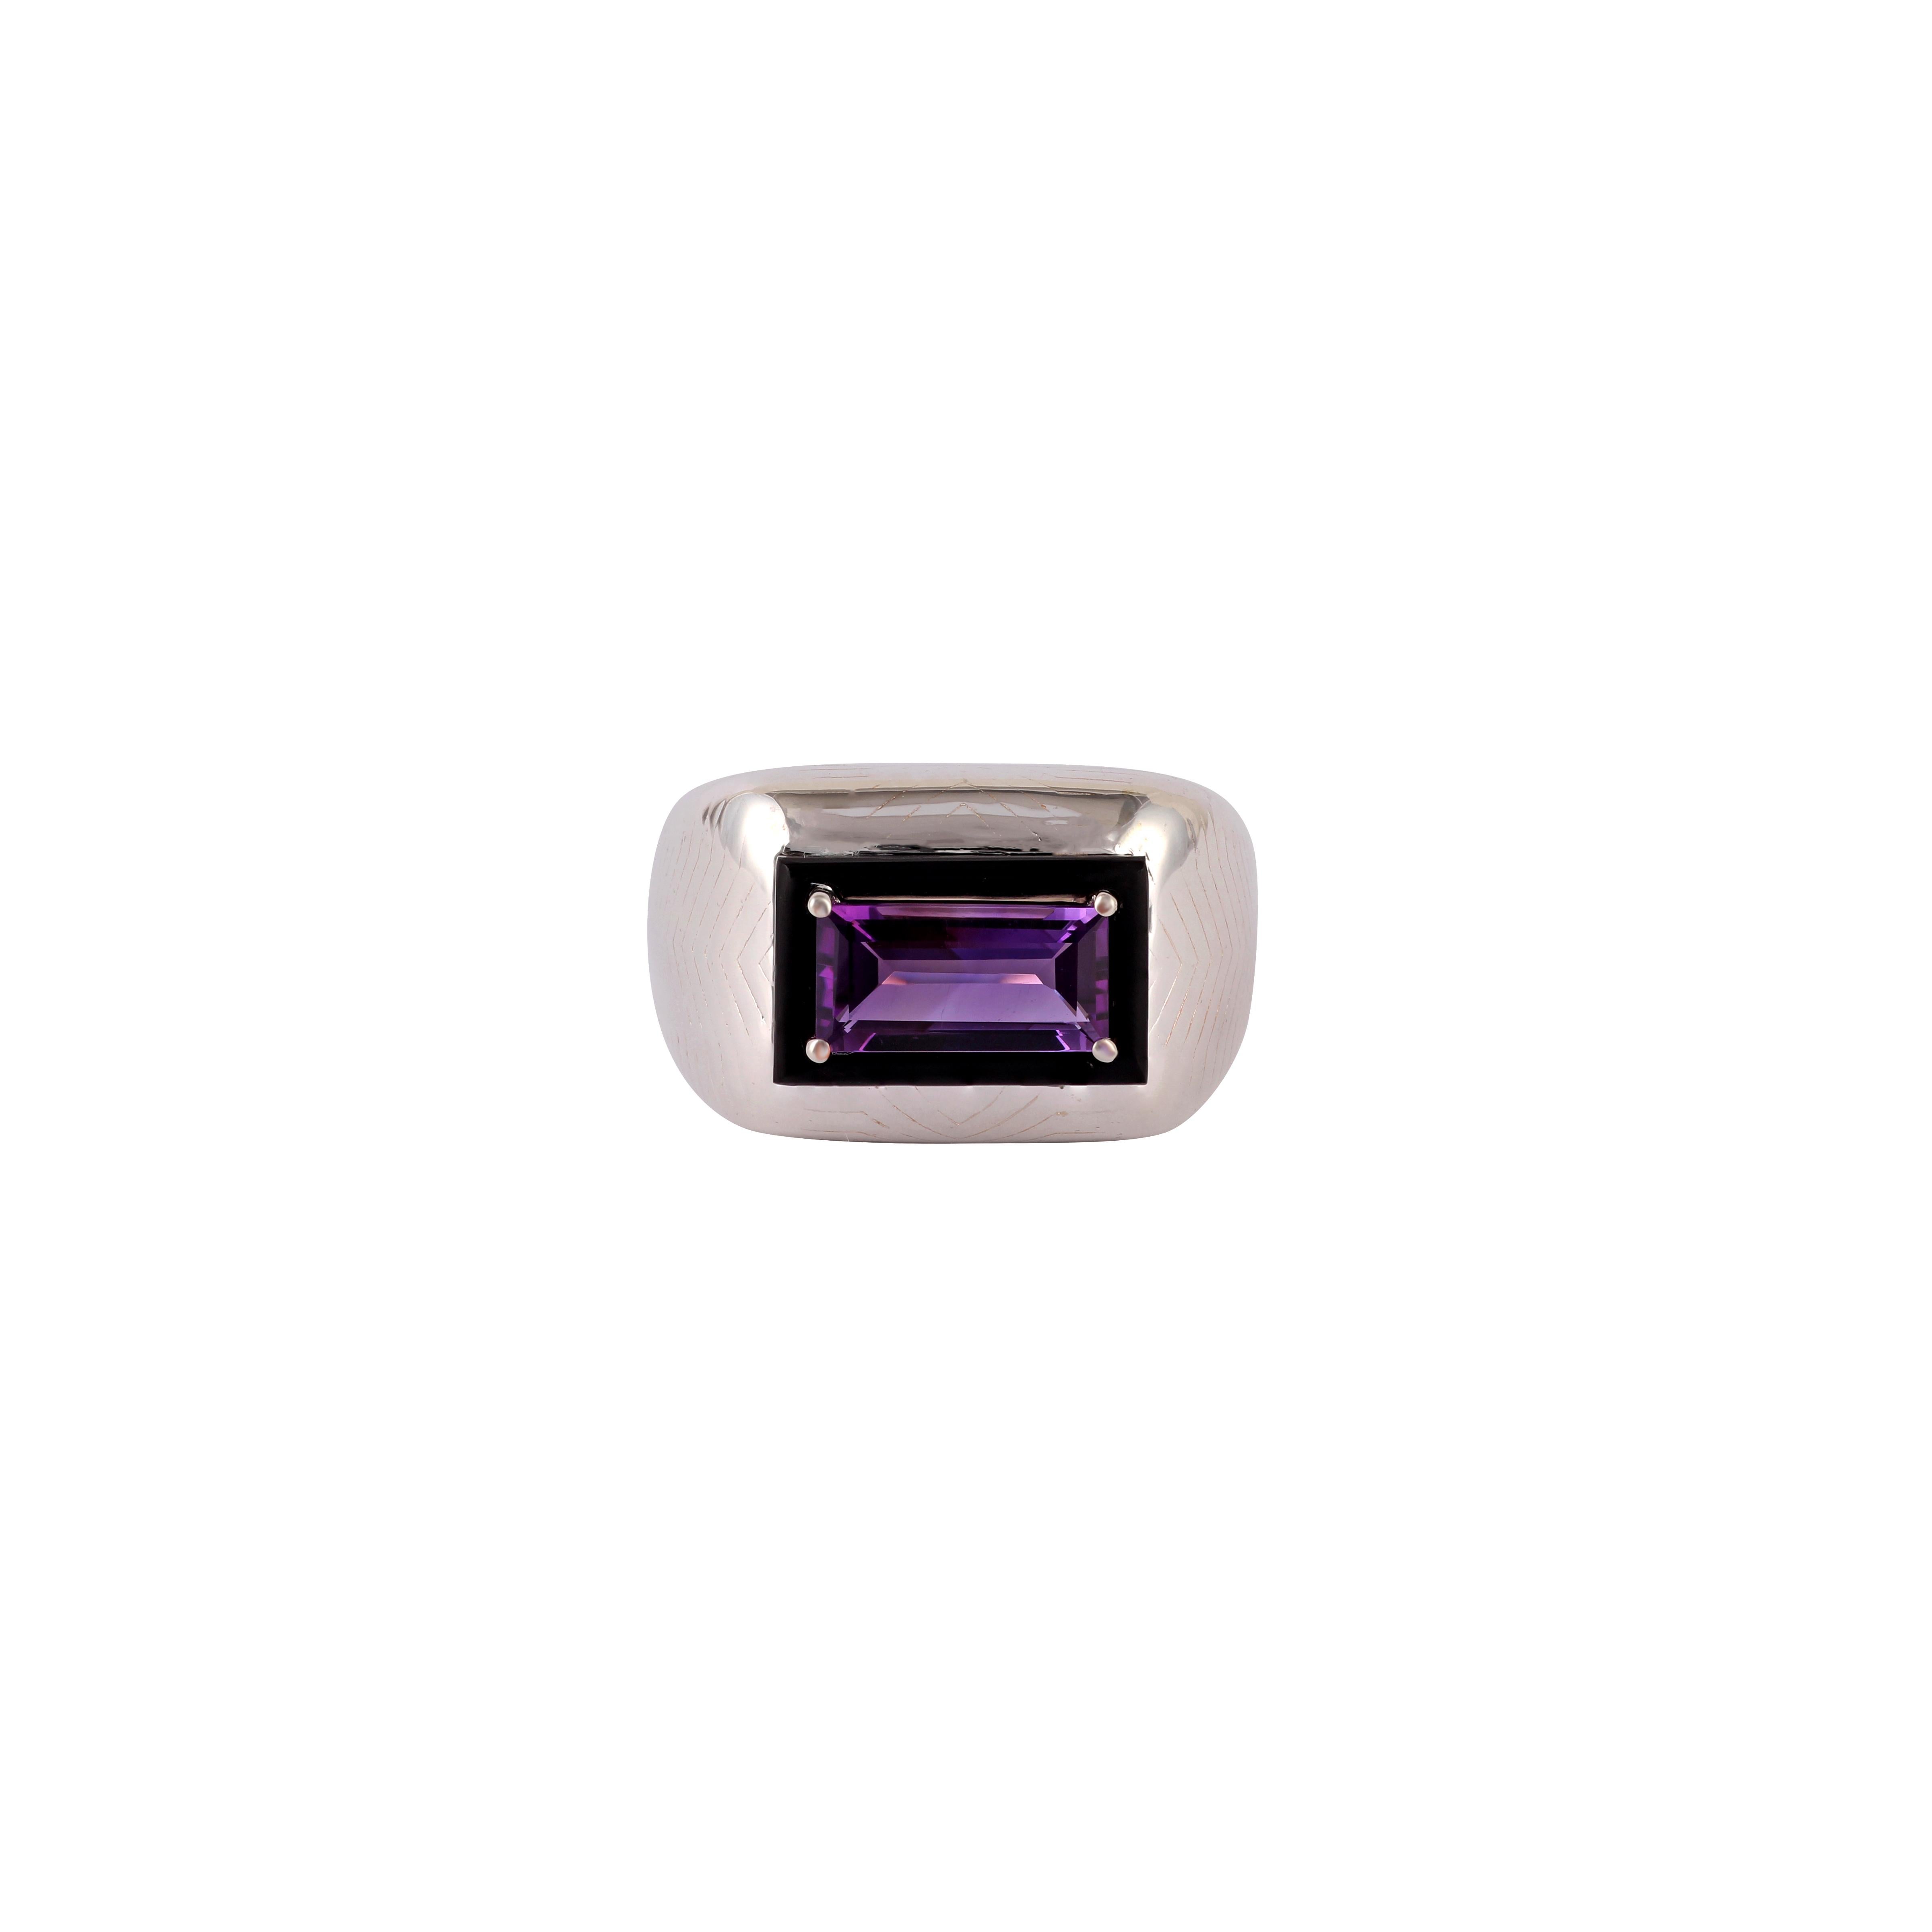 Mens Big Boulder  Silver Ring With Amethyst & Black Onex  Gem Stones in Sliver

Amethyst  : 2.27 Carat
 Black Onyx : 1.74 Carat 

Custom Services
Resizing is available.
Request Customization
